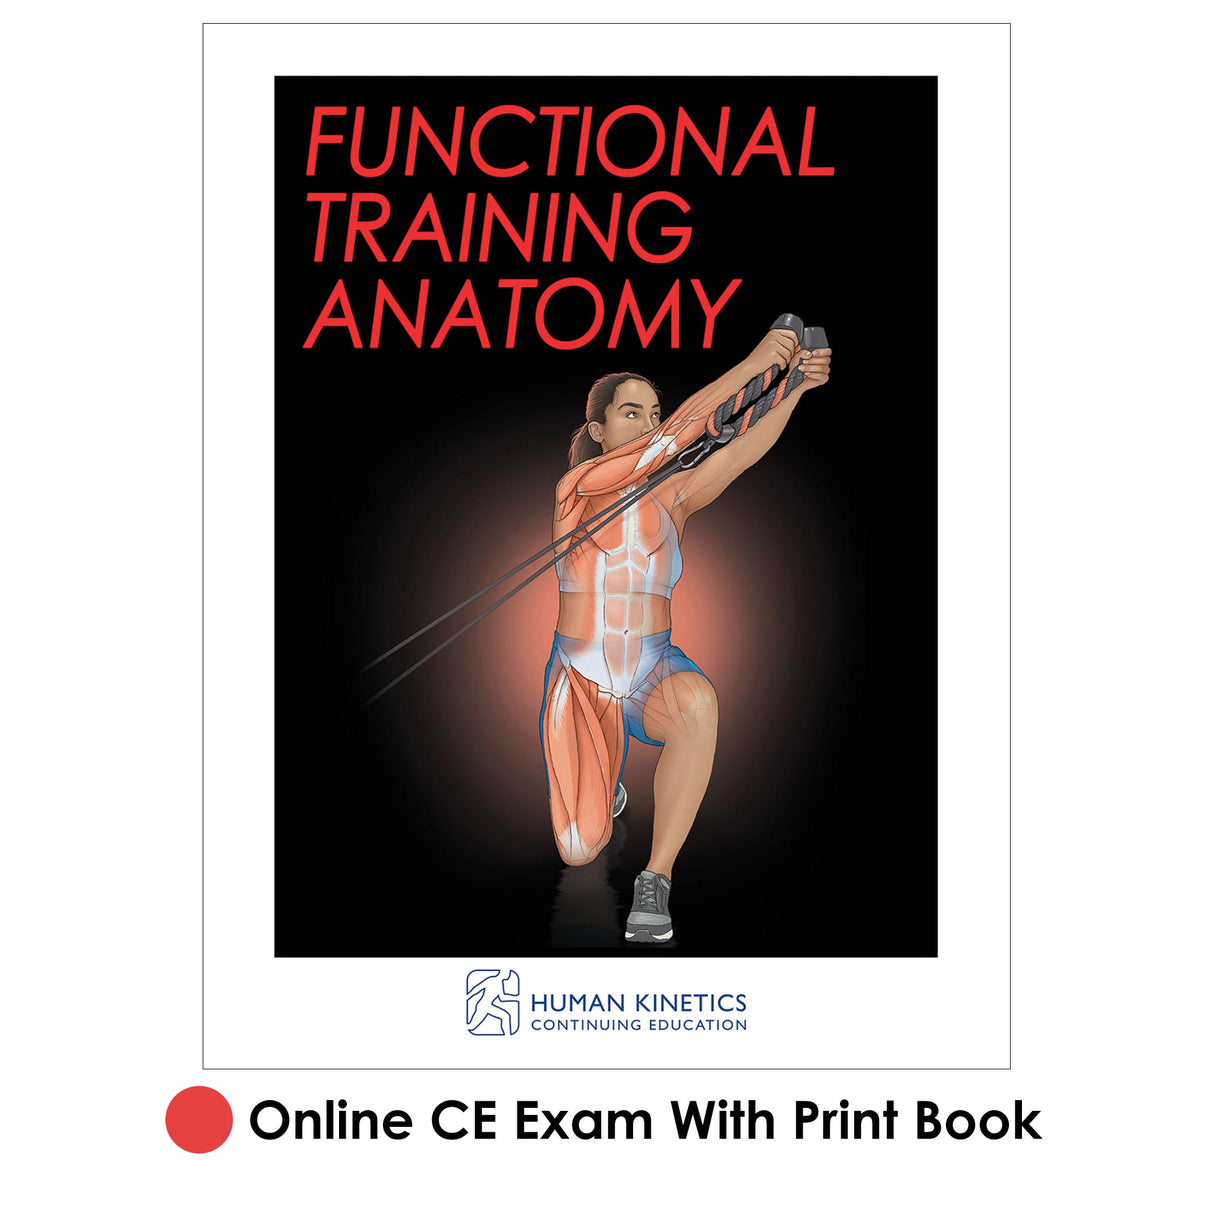 Functional Training Anatomy Online CE Exam With Print Book